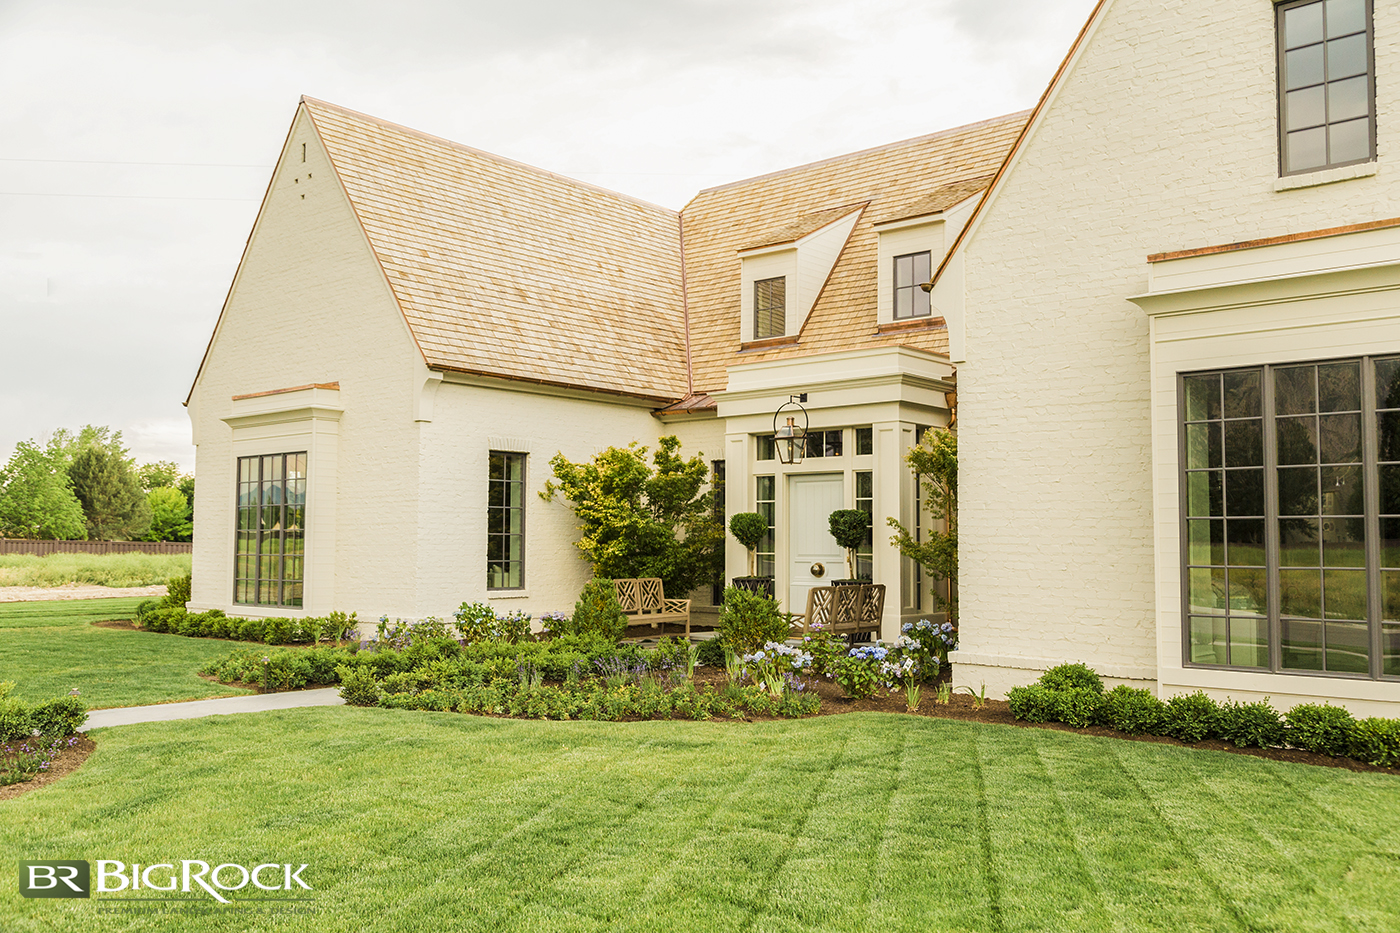 Your landscaping is the first thing people see when they come to your house, which is why landscaping for curb appeal is so important. We’re sharing 13 curb appeal landscaping ideas to help you improve the look of your home from the street to the front door.